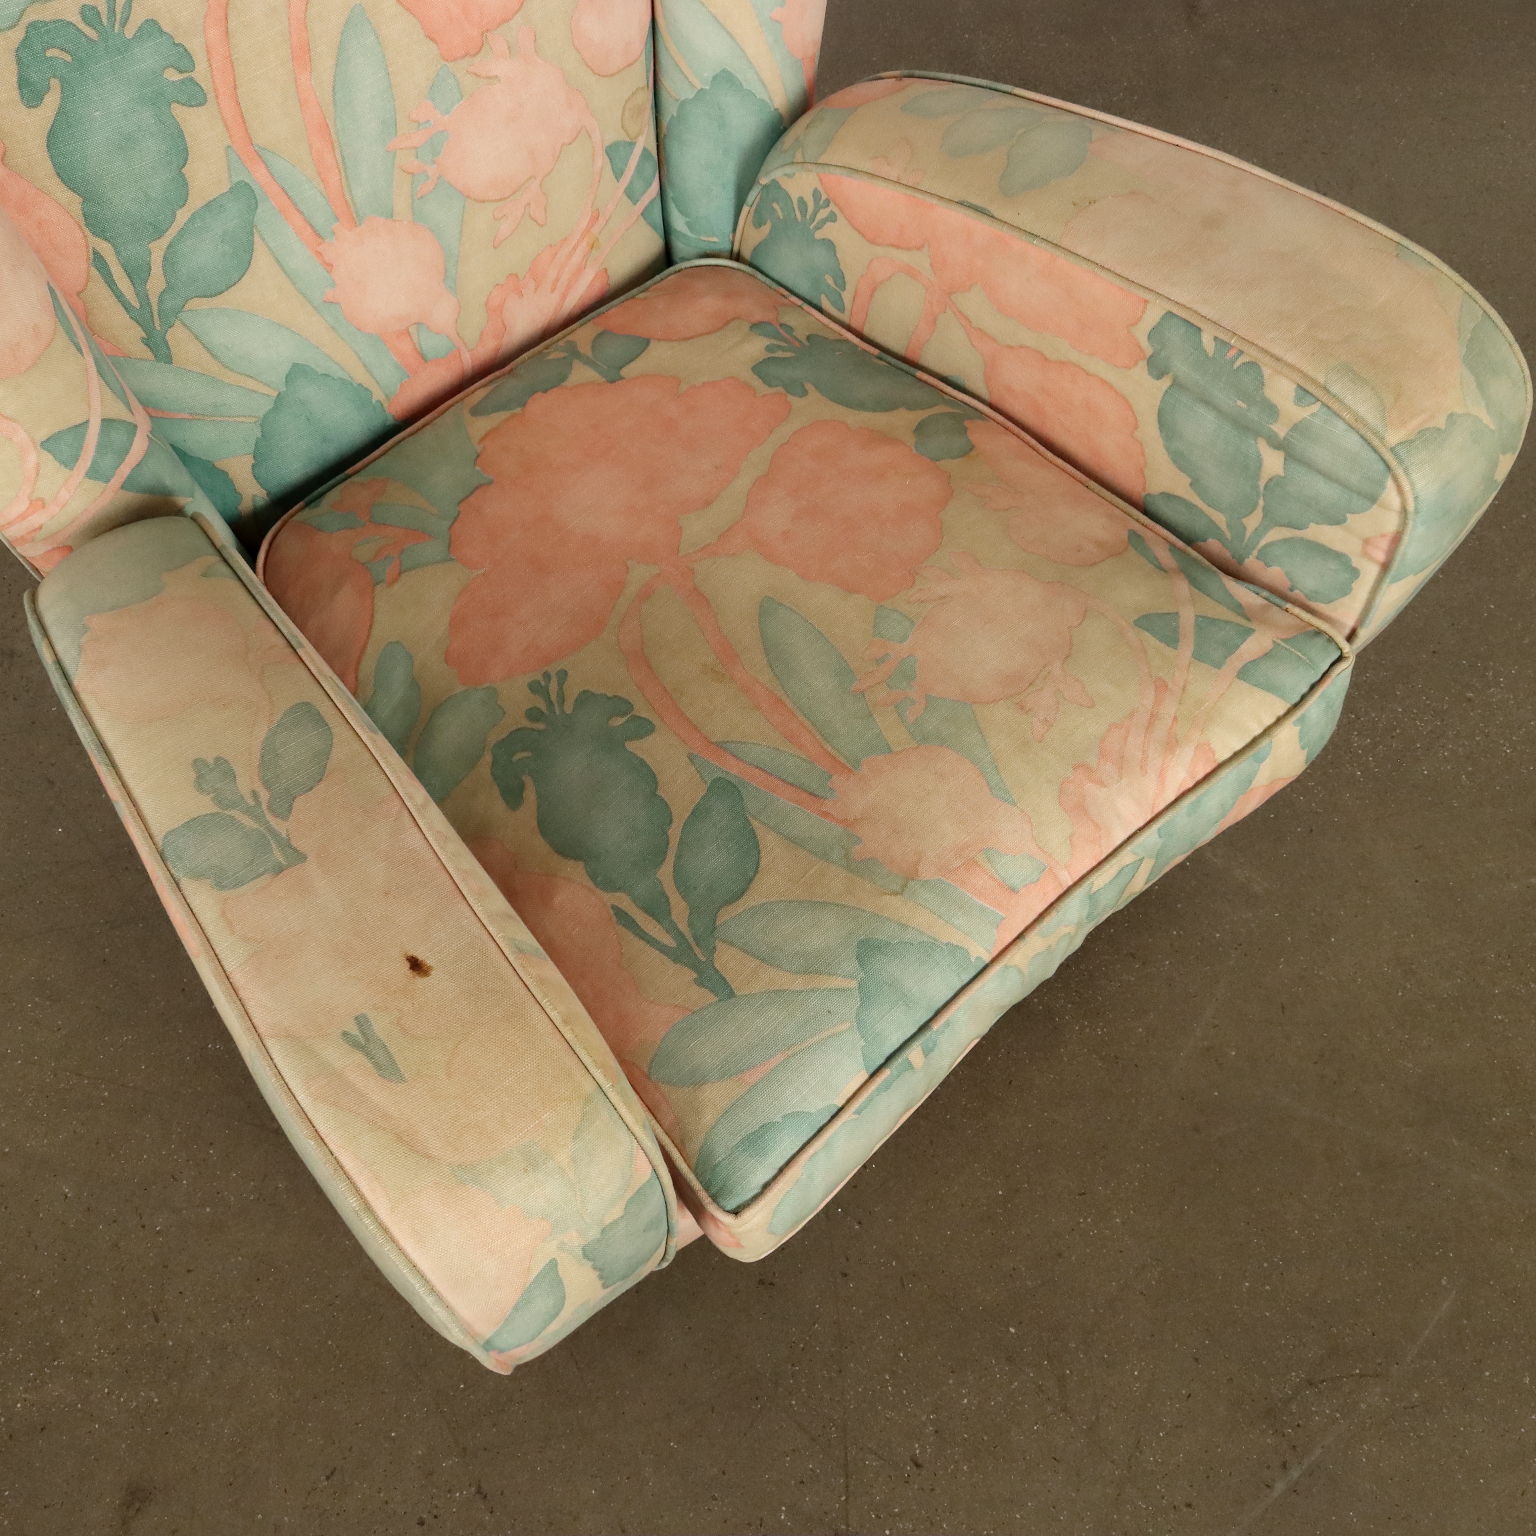 Pair of Vintage 1950s Armchairs Fabric Italy